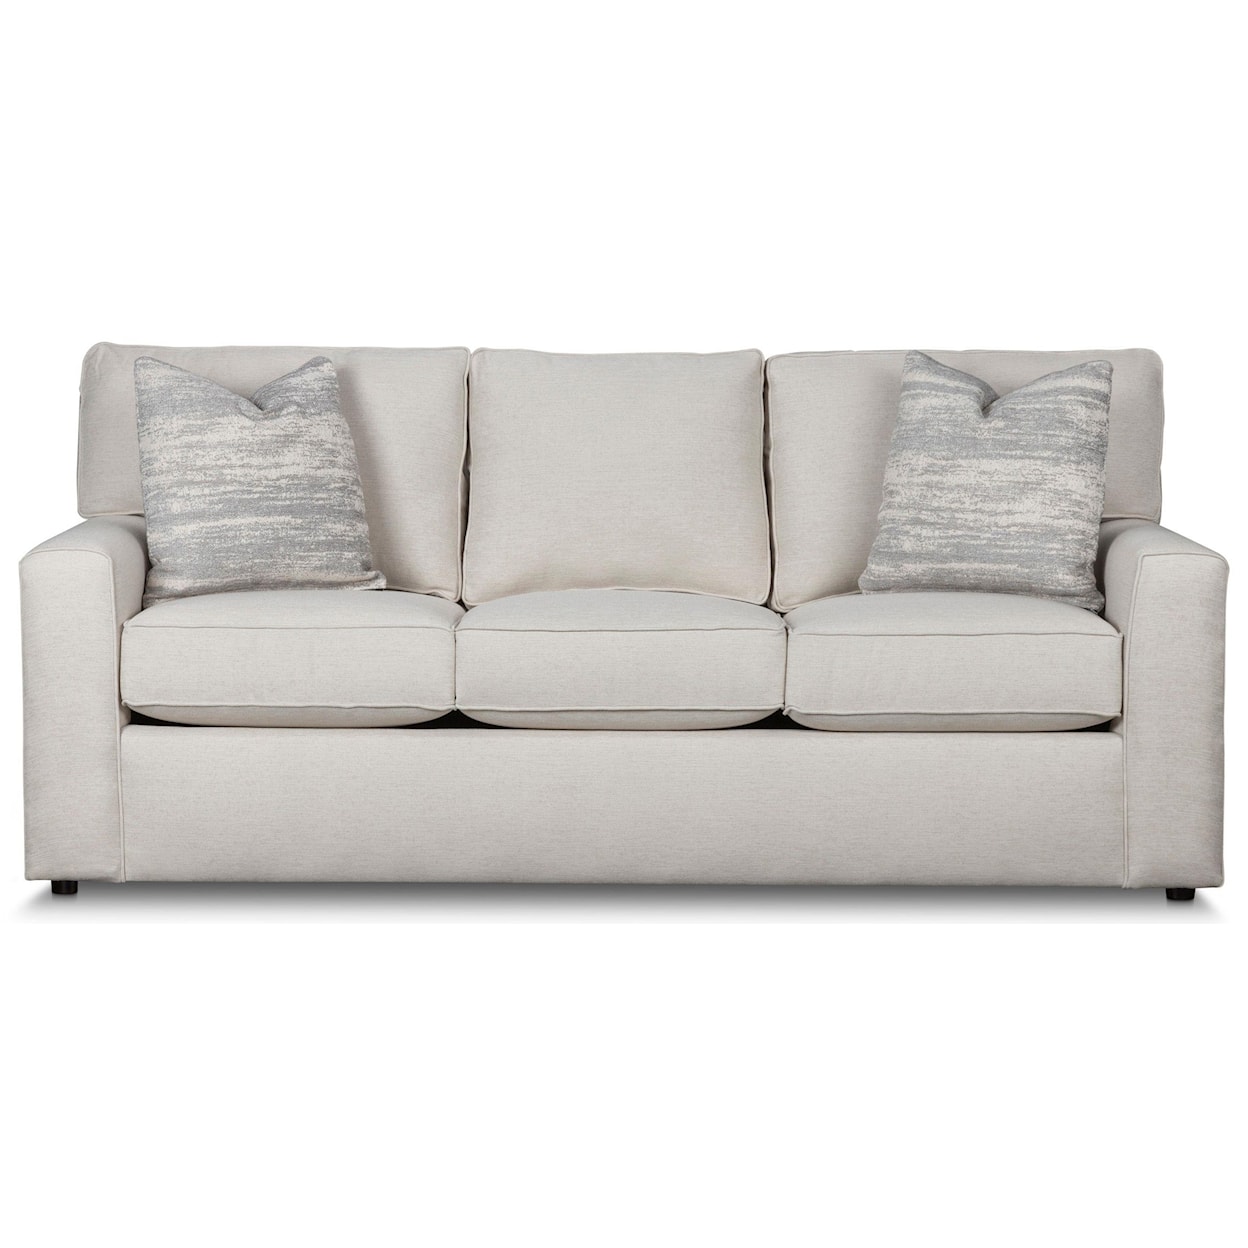 Stone & Leigh Furniture Leigh Upholstered Sofa